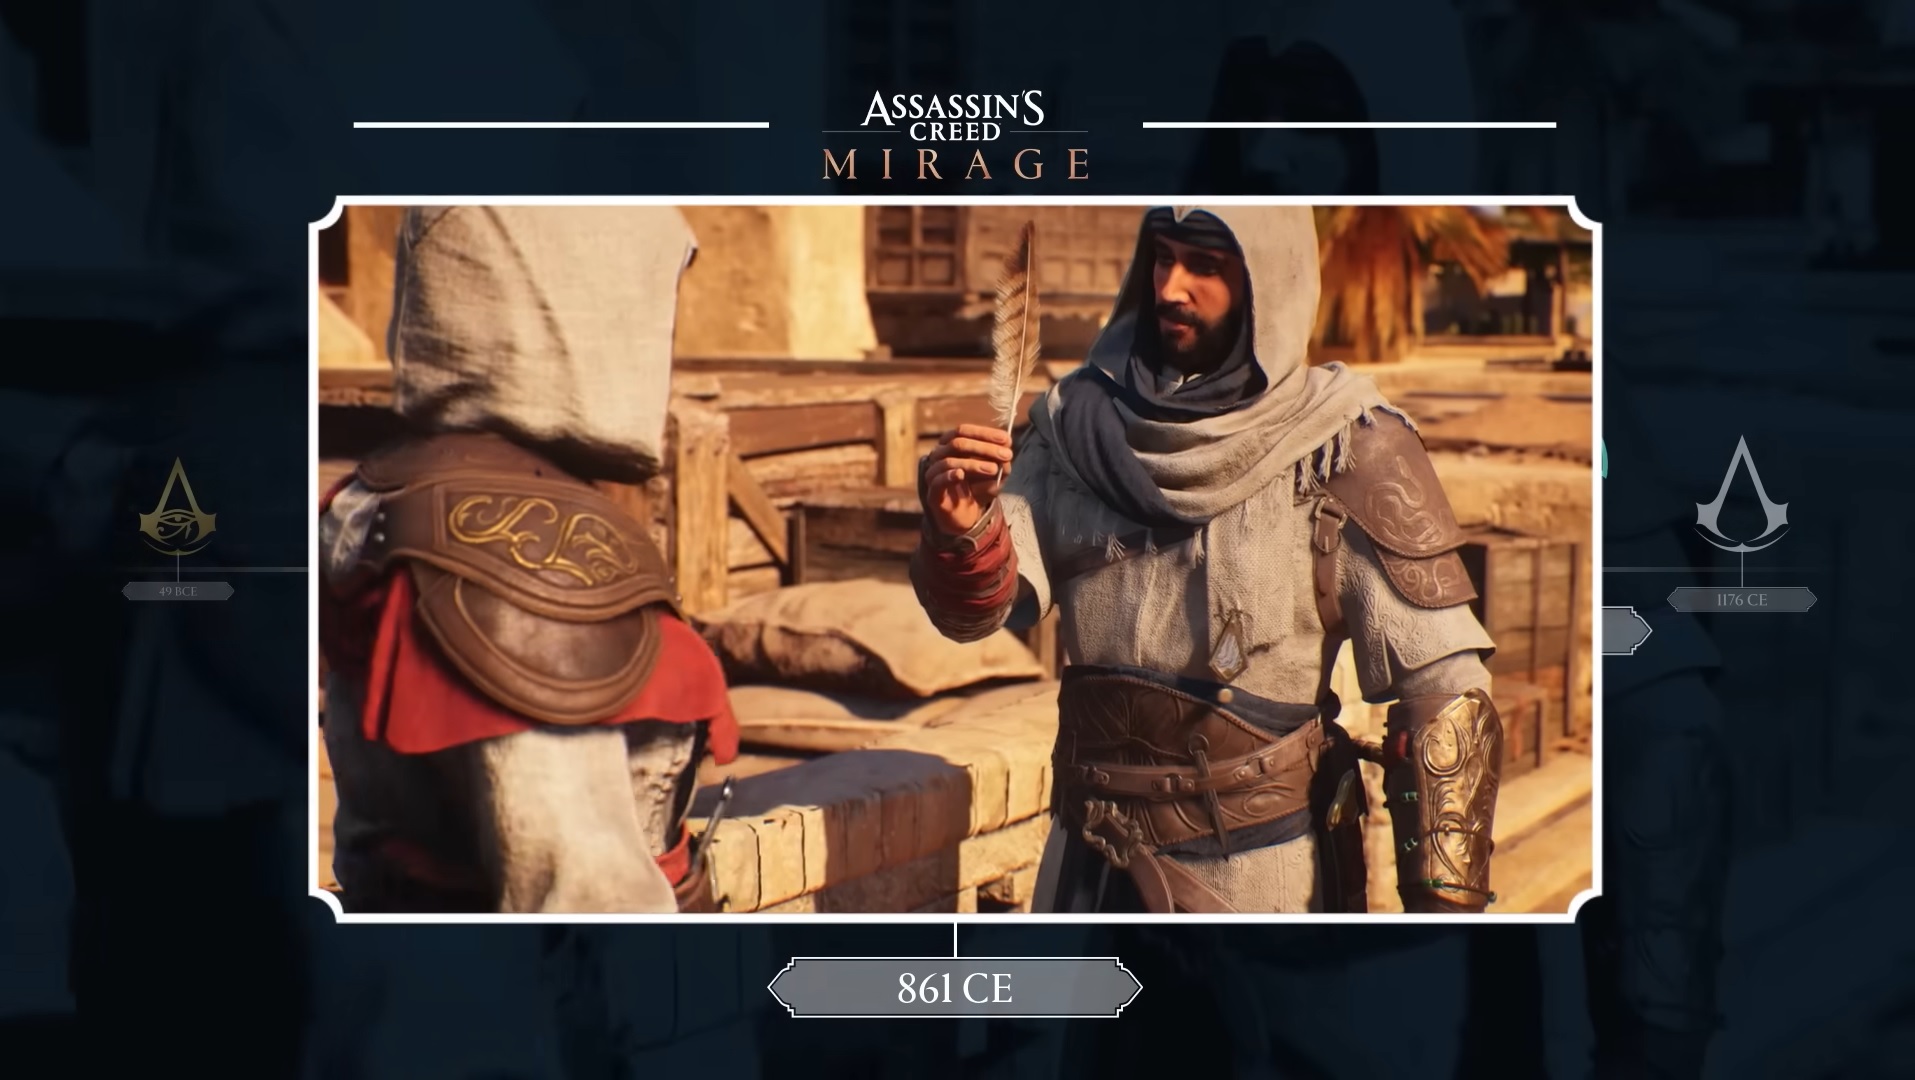 Assassin's Creed Mirage Timeline